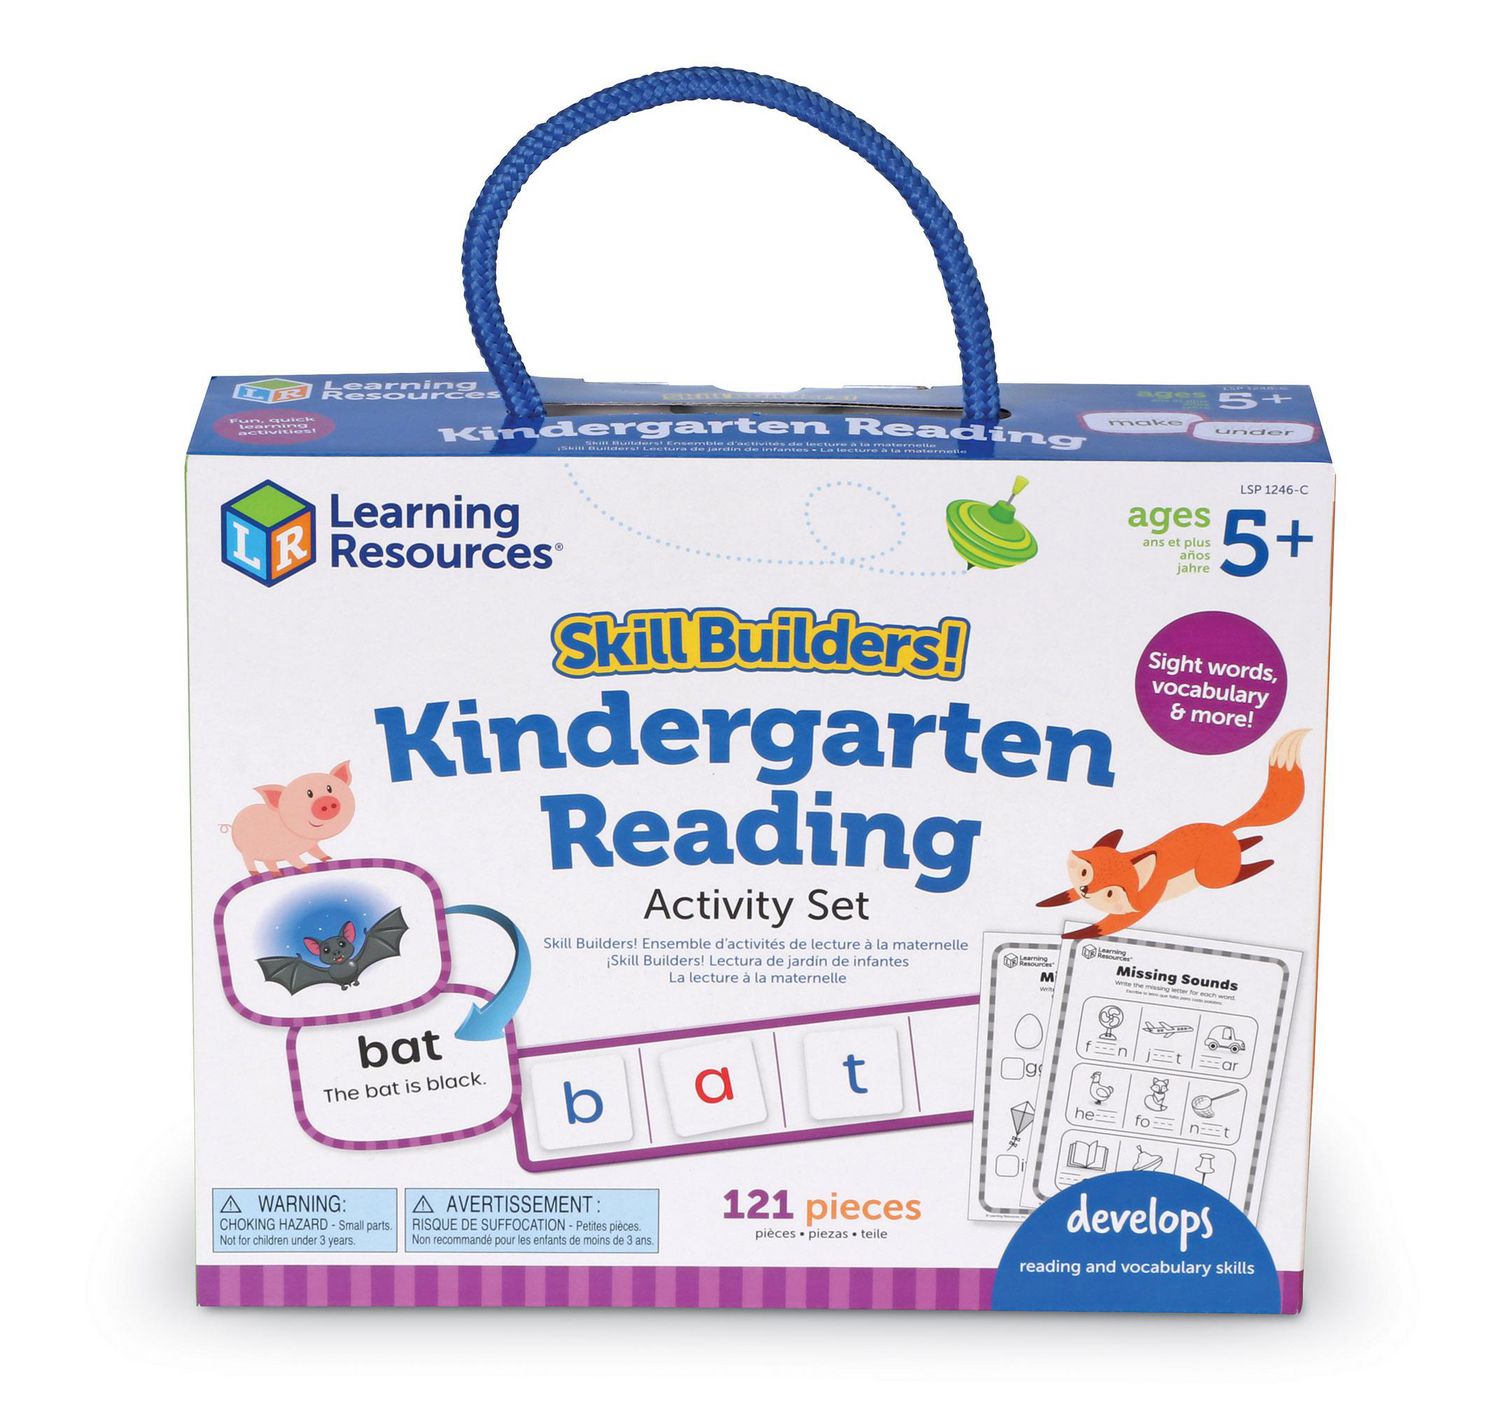 Resources　Reading　Pieces,　Learning　Learning　Learning　Kids,　Reading　Kindergarten　122　Activities　Homeschool　Essential　Kindergarten　Kindergarten　Resources　Skill　5+　Supplies,　Materials,　Activity　Builders!　Builders　Set　Ages　for　Skill